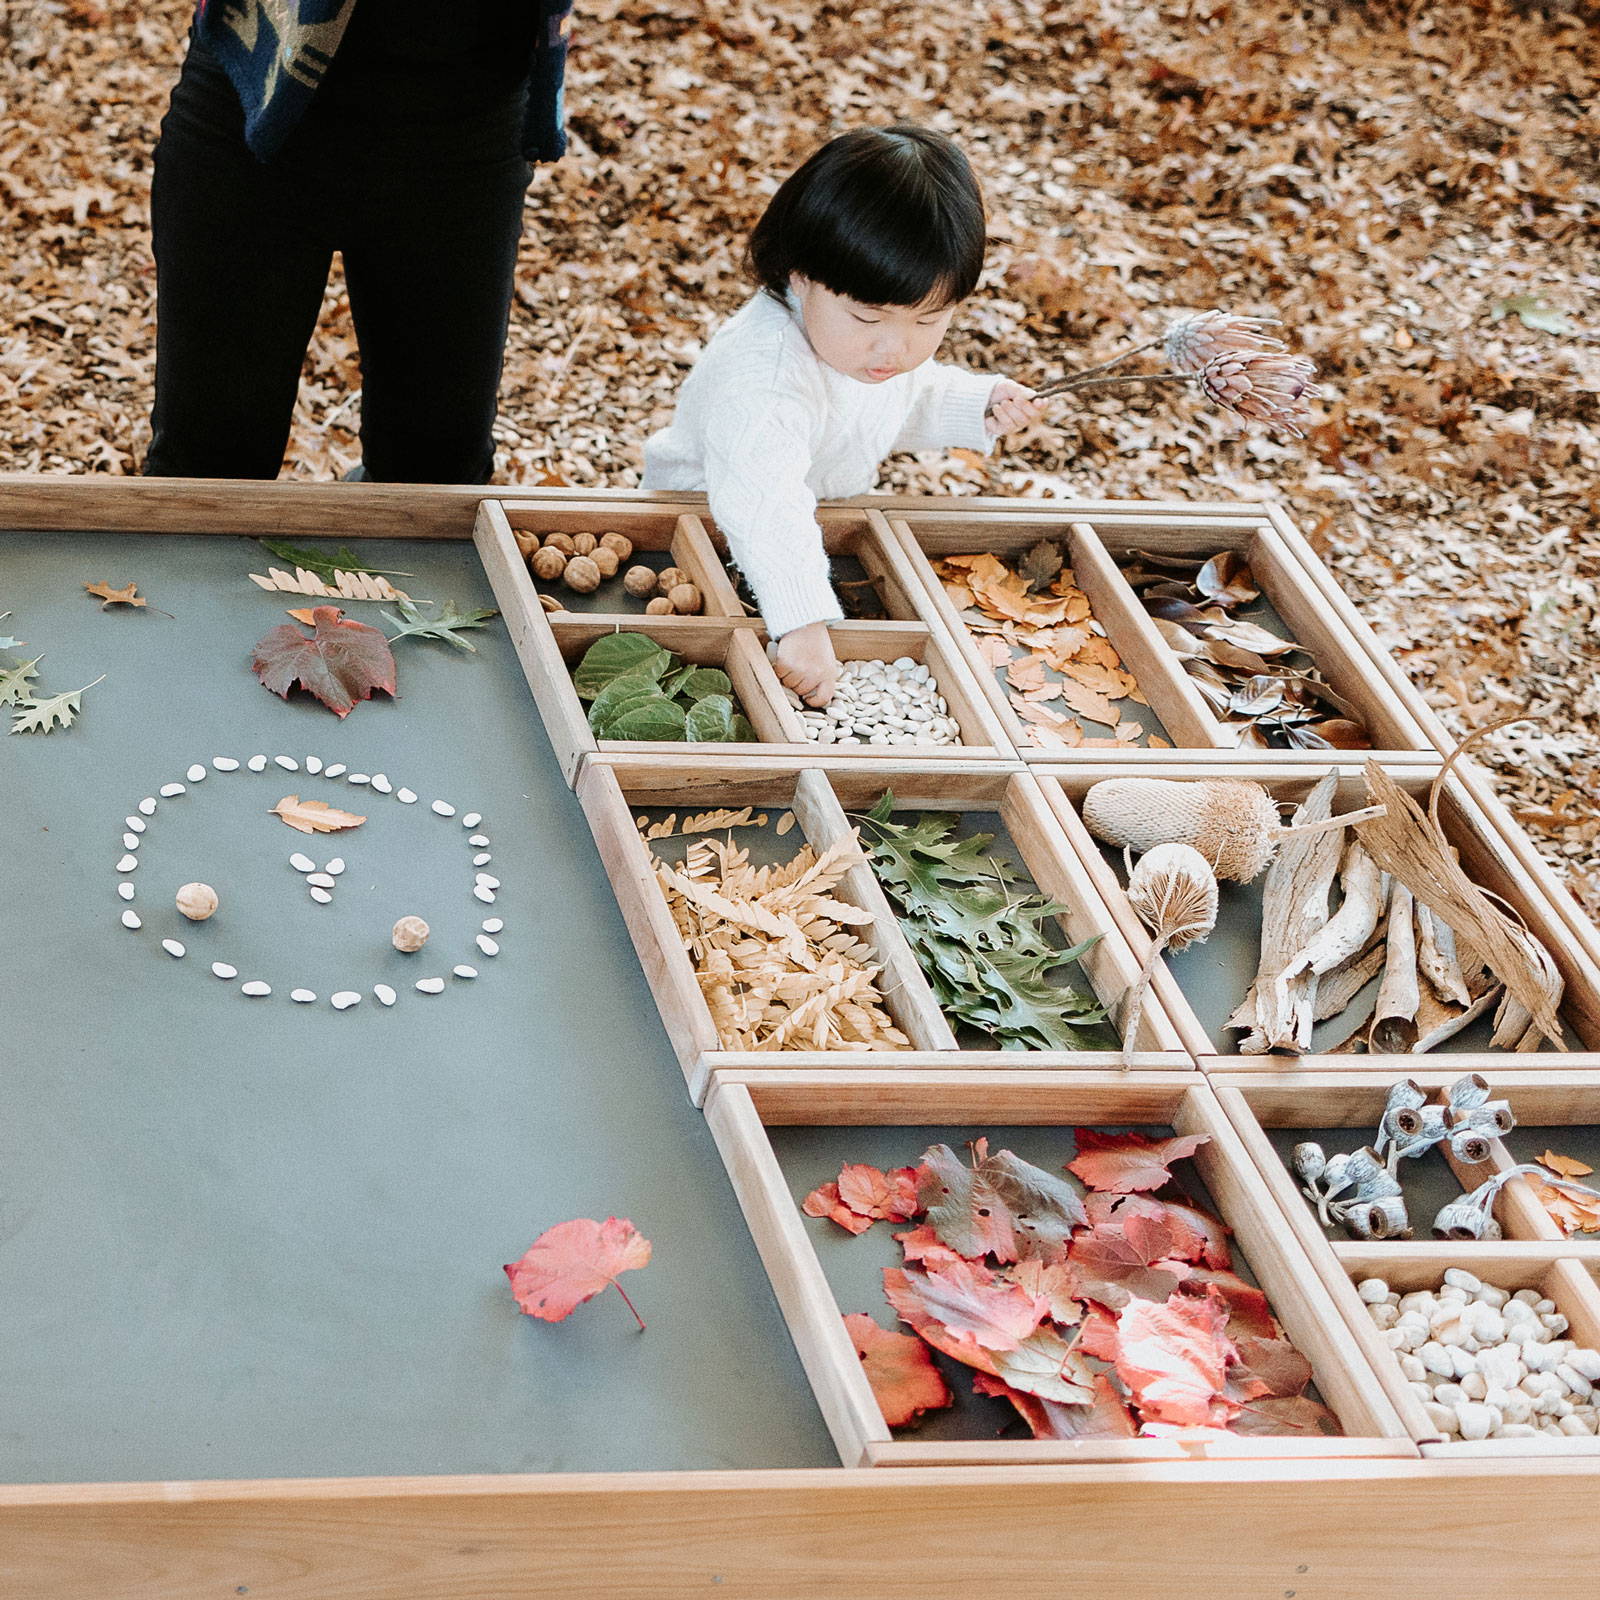 An exploration table for sensory play